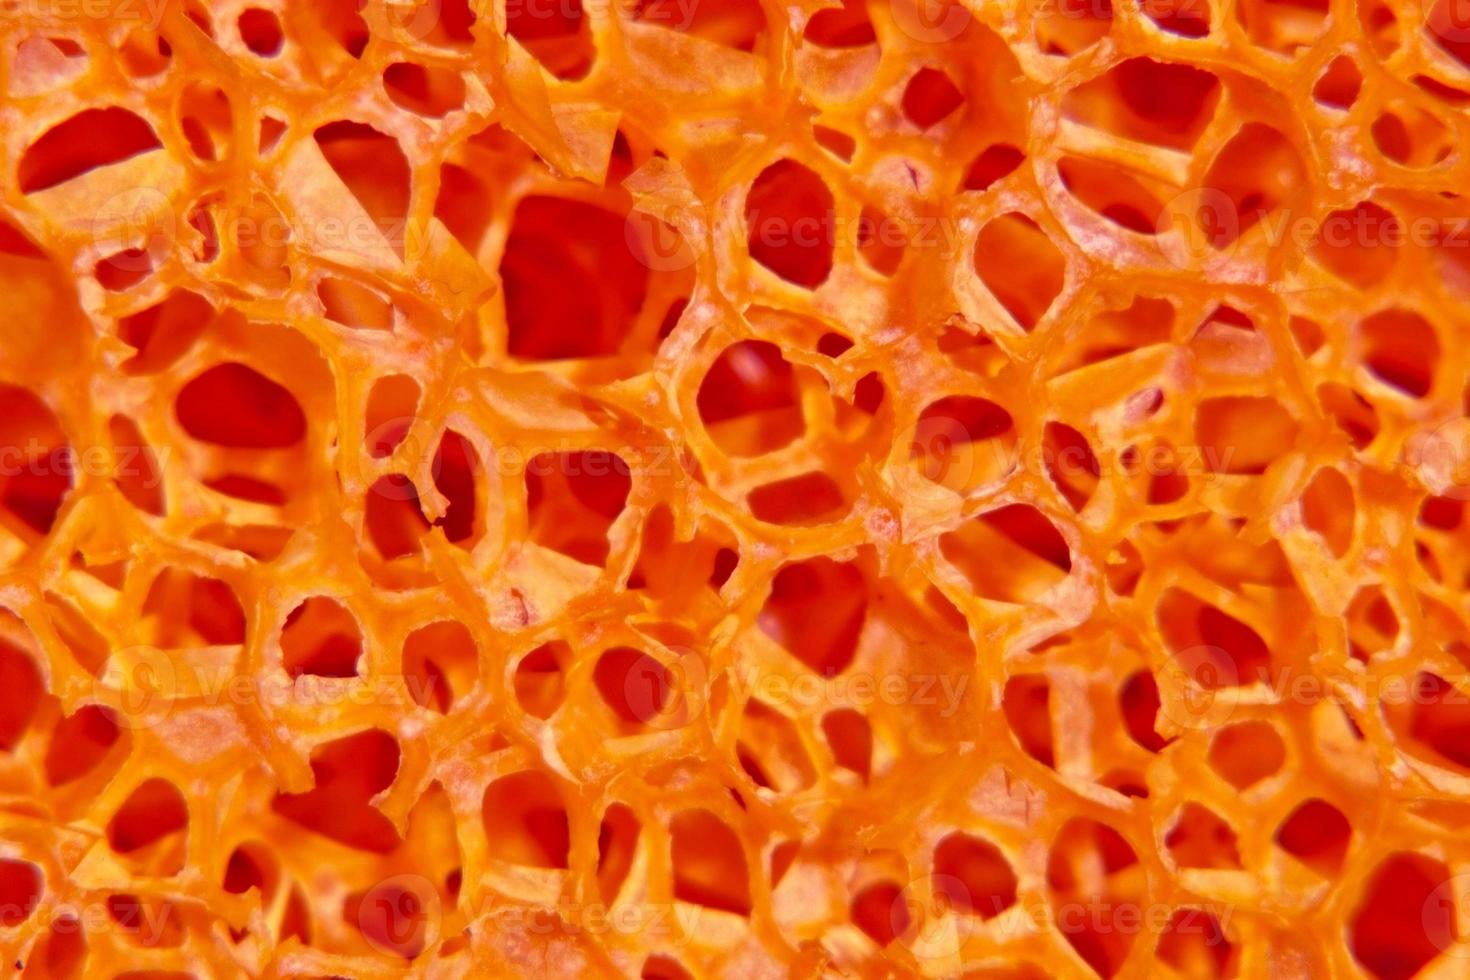 Red porous structure. photo